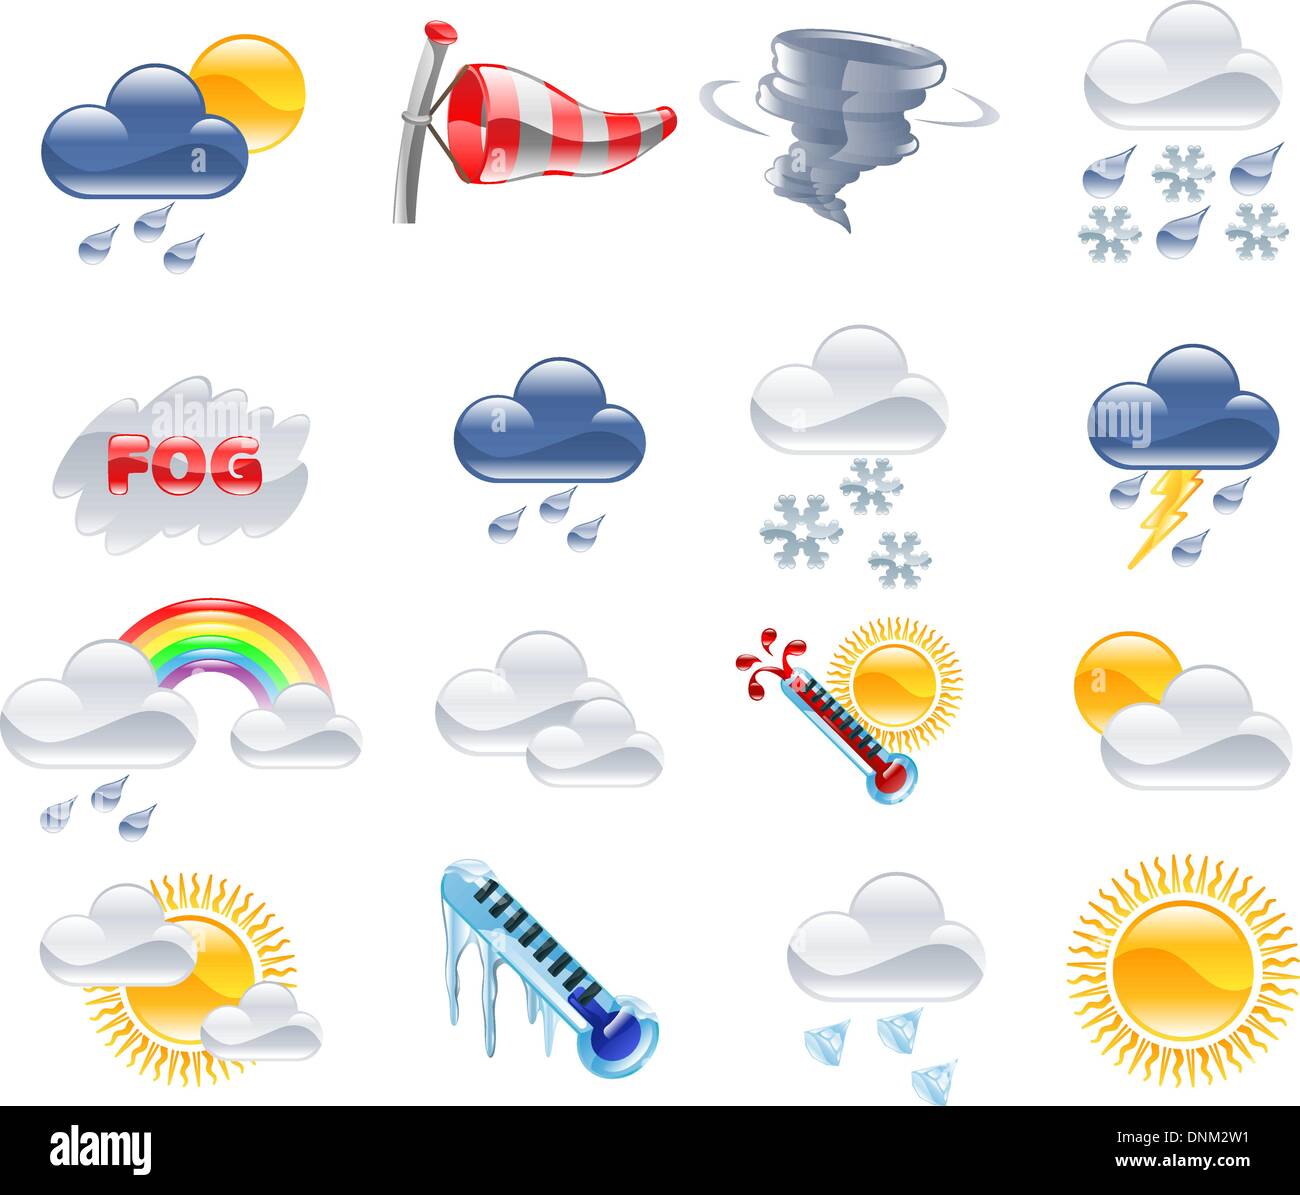 A high quality icon set relating to weather and weather forecasting. Stock Vector